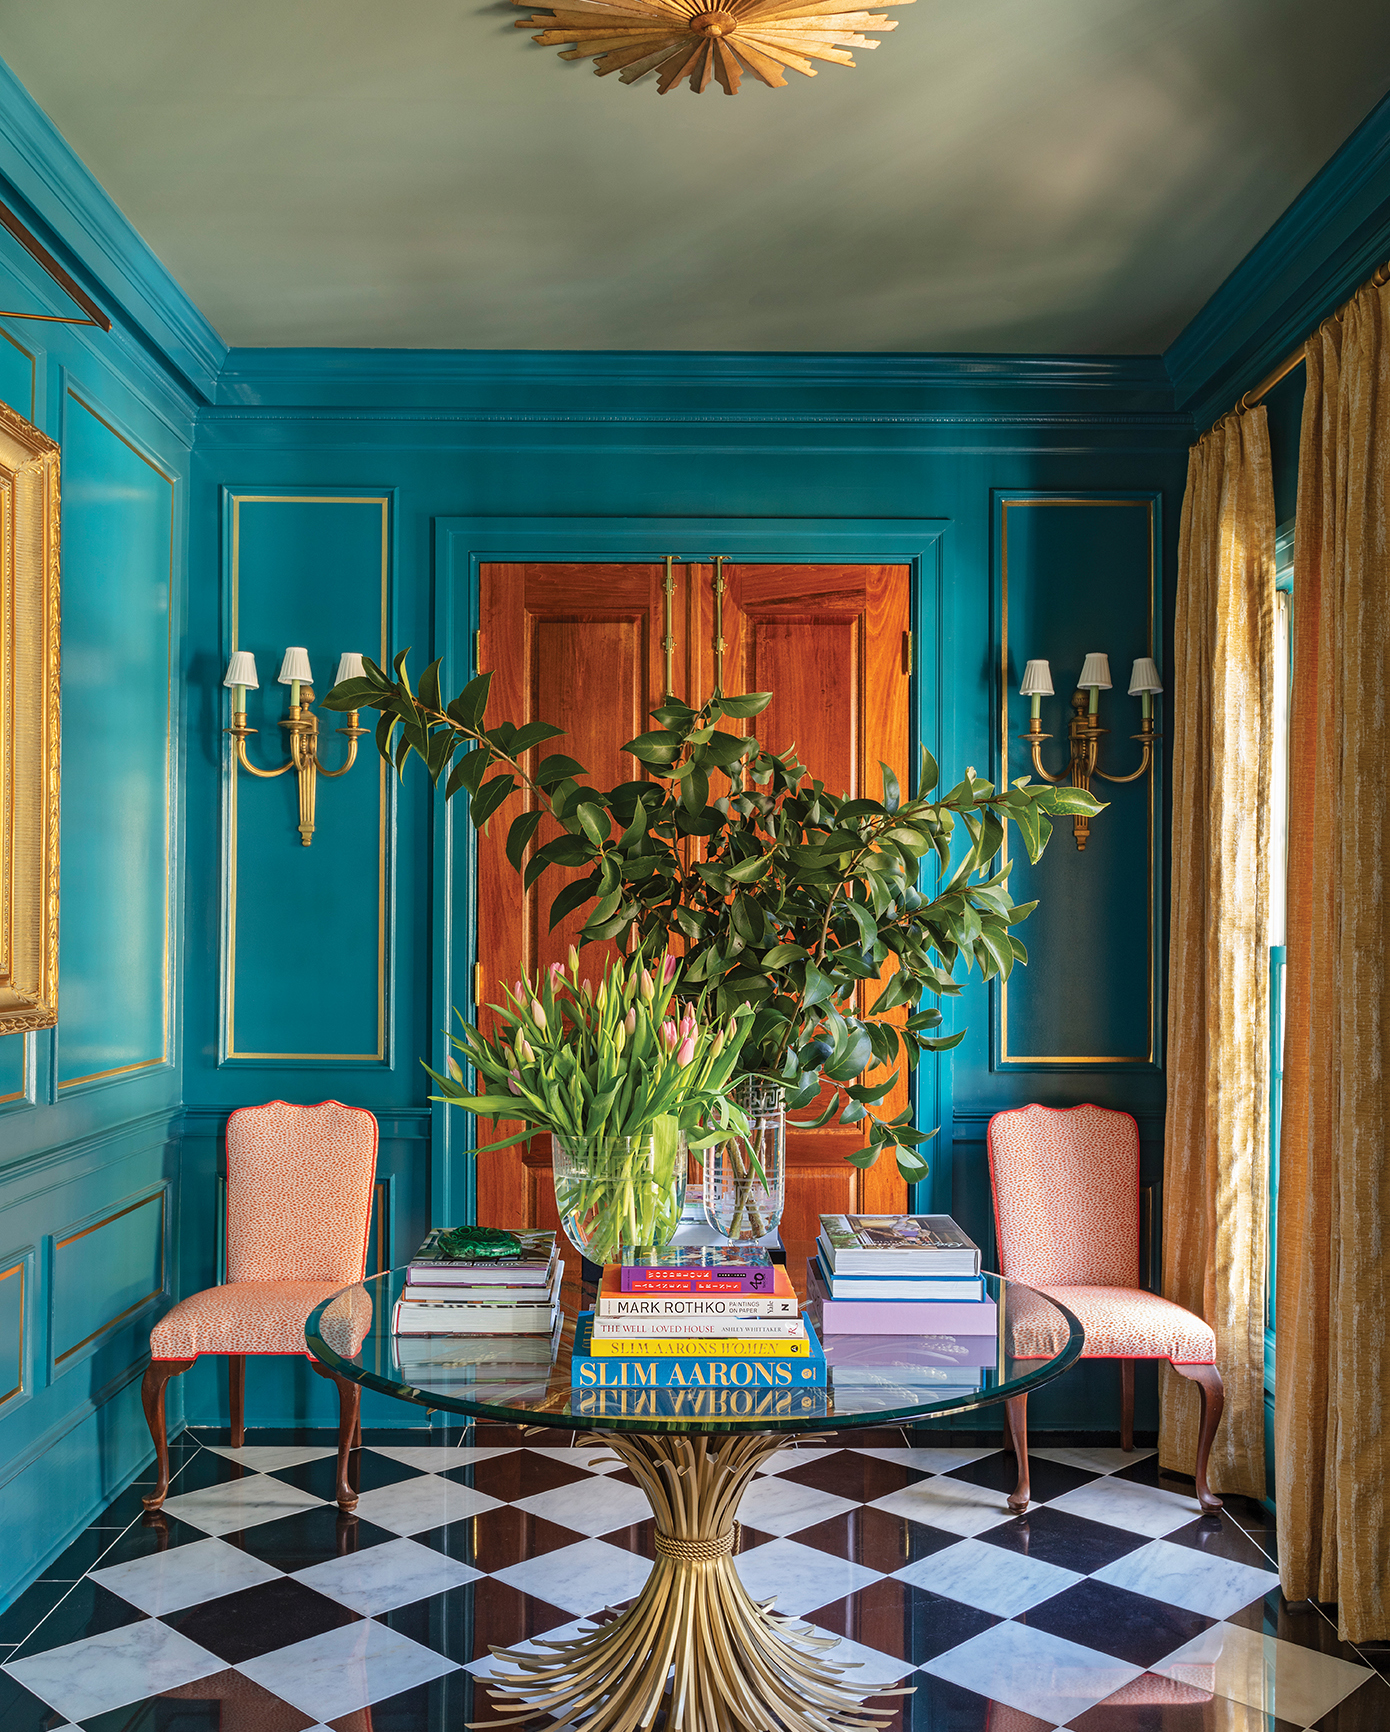 The foyer is painted in Sherwin Williams “Historic Charleston Port Royal.” The couple found the vintage wheat sheaf table at a flea market in Paris.